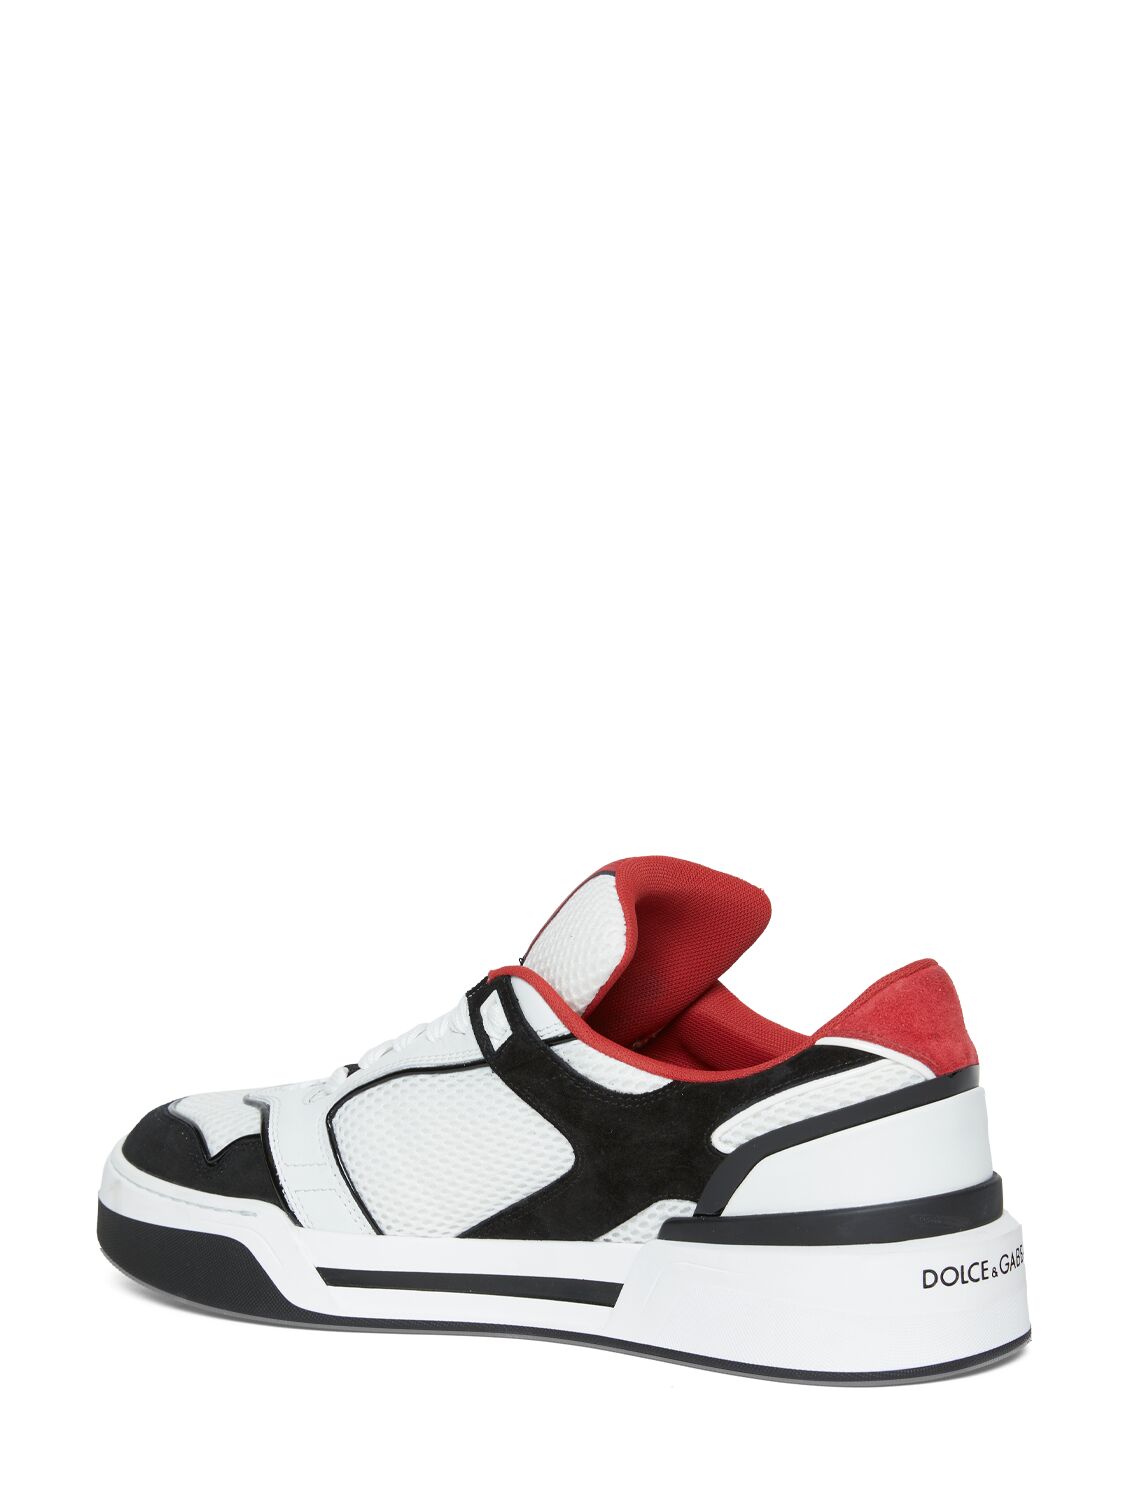 Shop Dolce & Gabbana New Roma Mesh & Suede Sneakers In Black,white